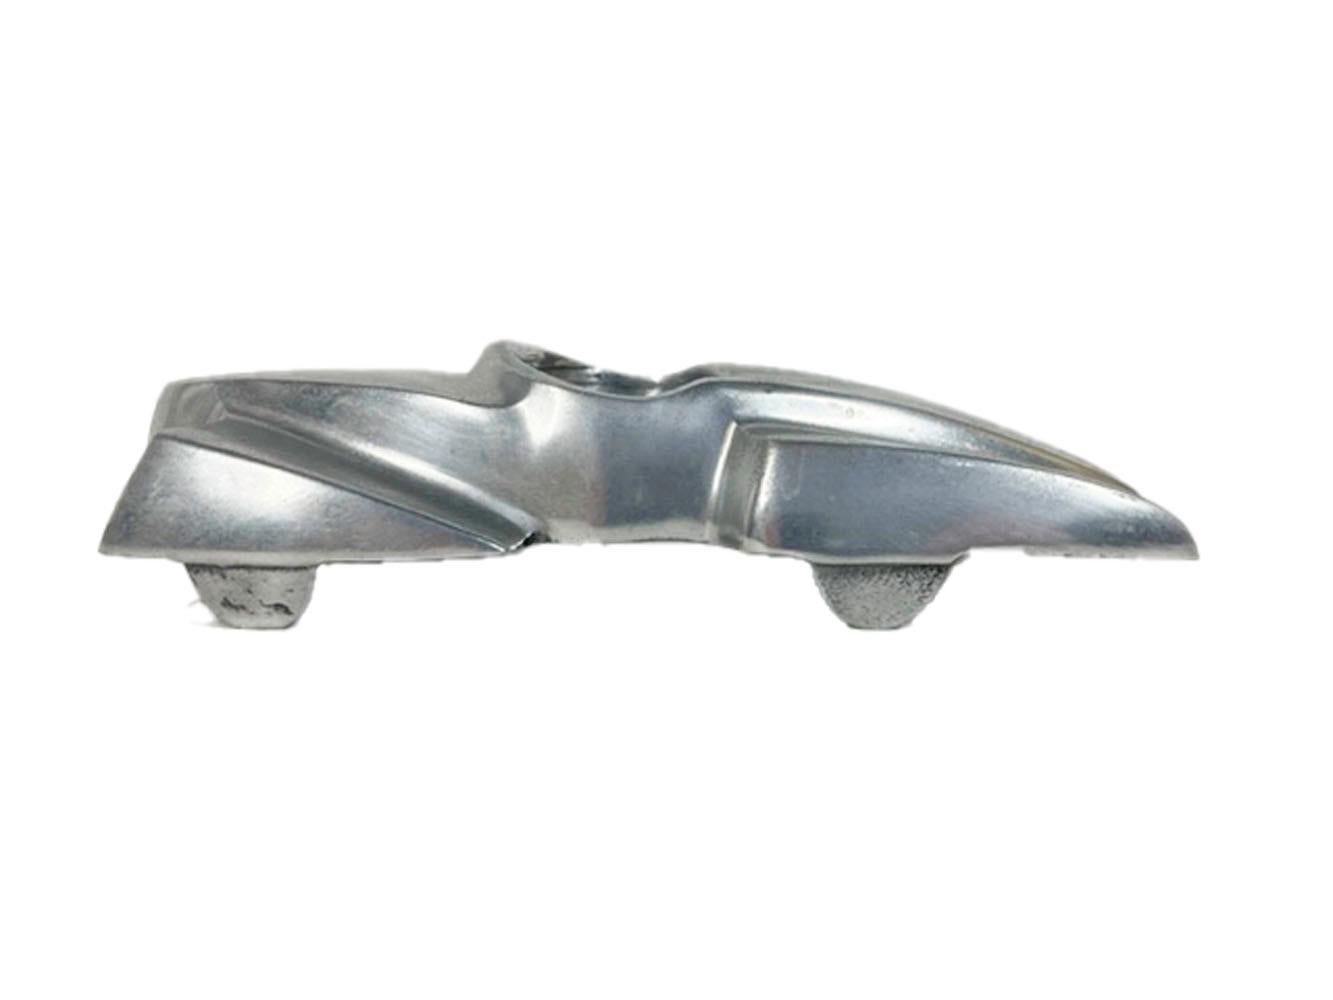 Vintage hand finished cast aluminum ashtray for cigars or cigarettes in the form of a streamlined sports car.